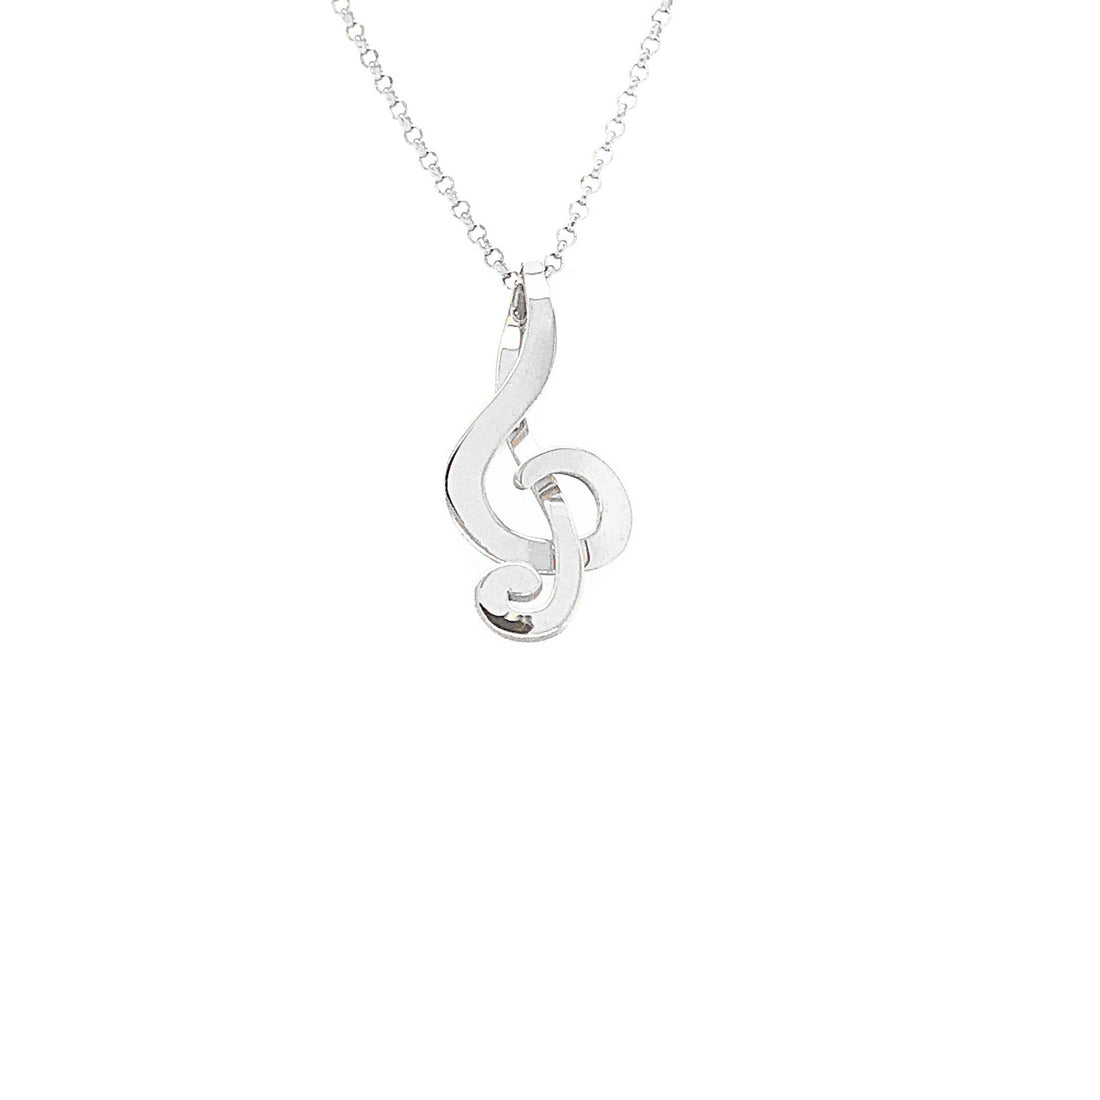 Chiavi G piccola necklace silver with short rolo chain.